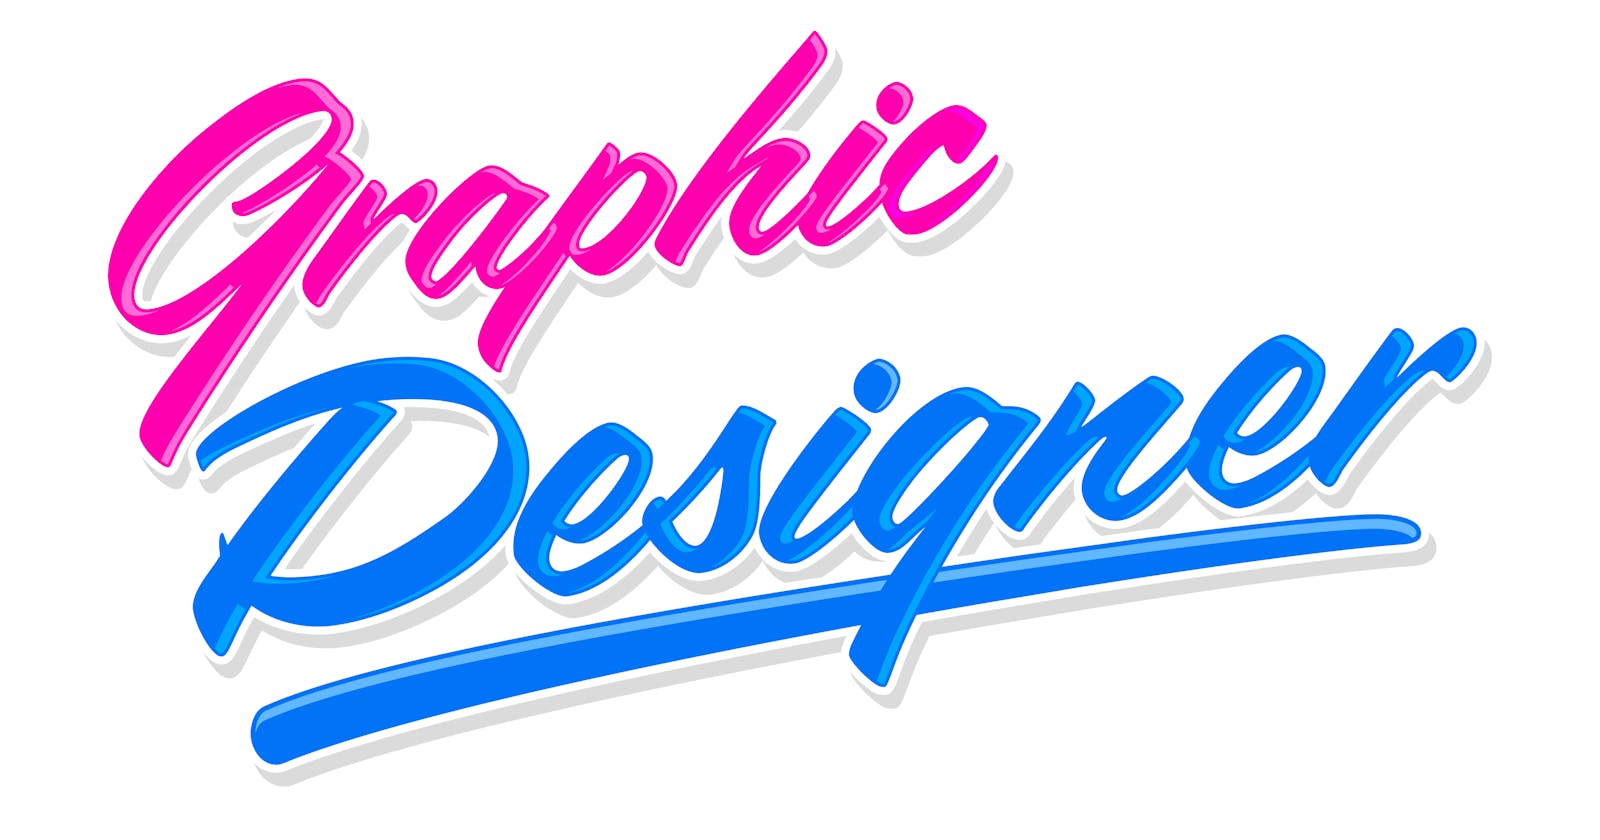 Step by step instructions to Become a Graphic Designer In 2022